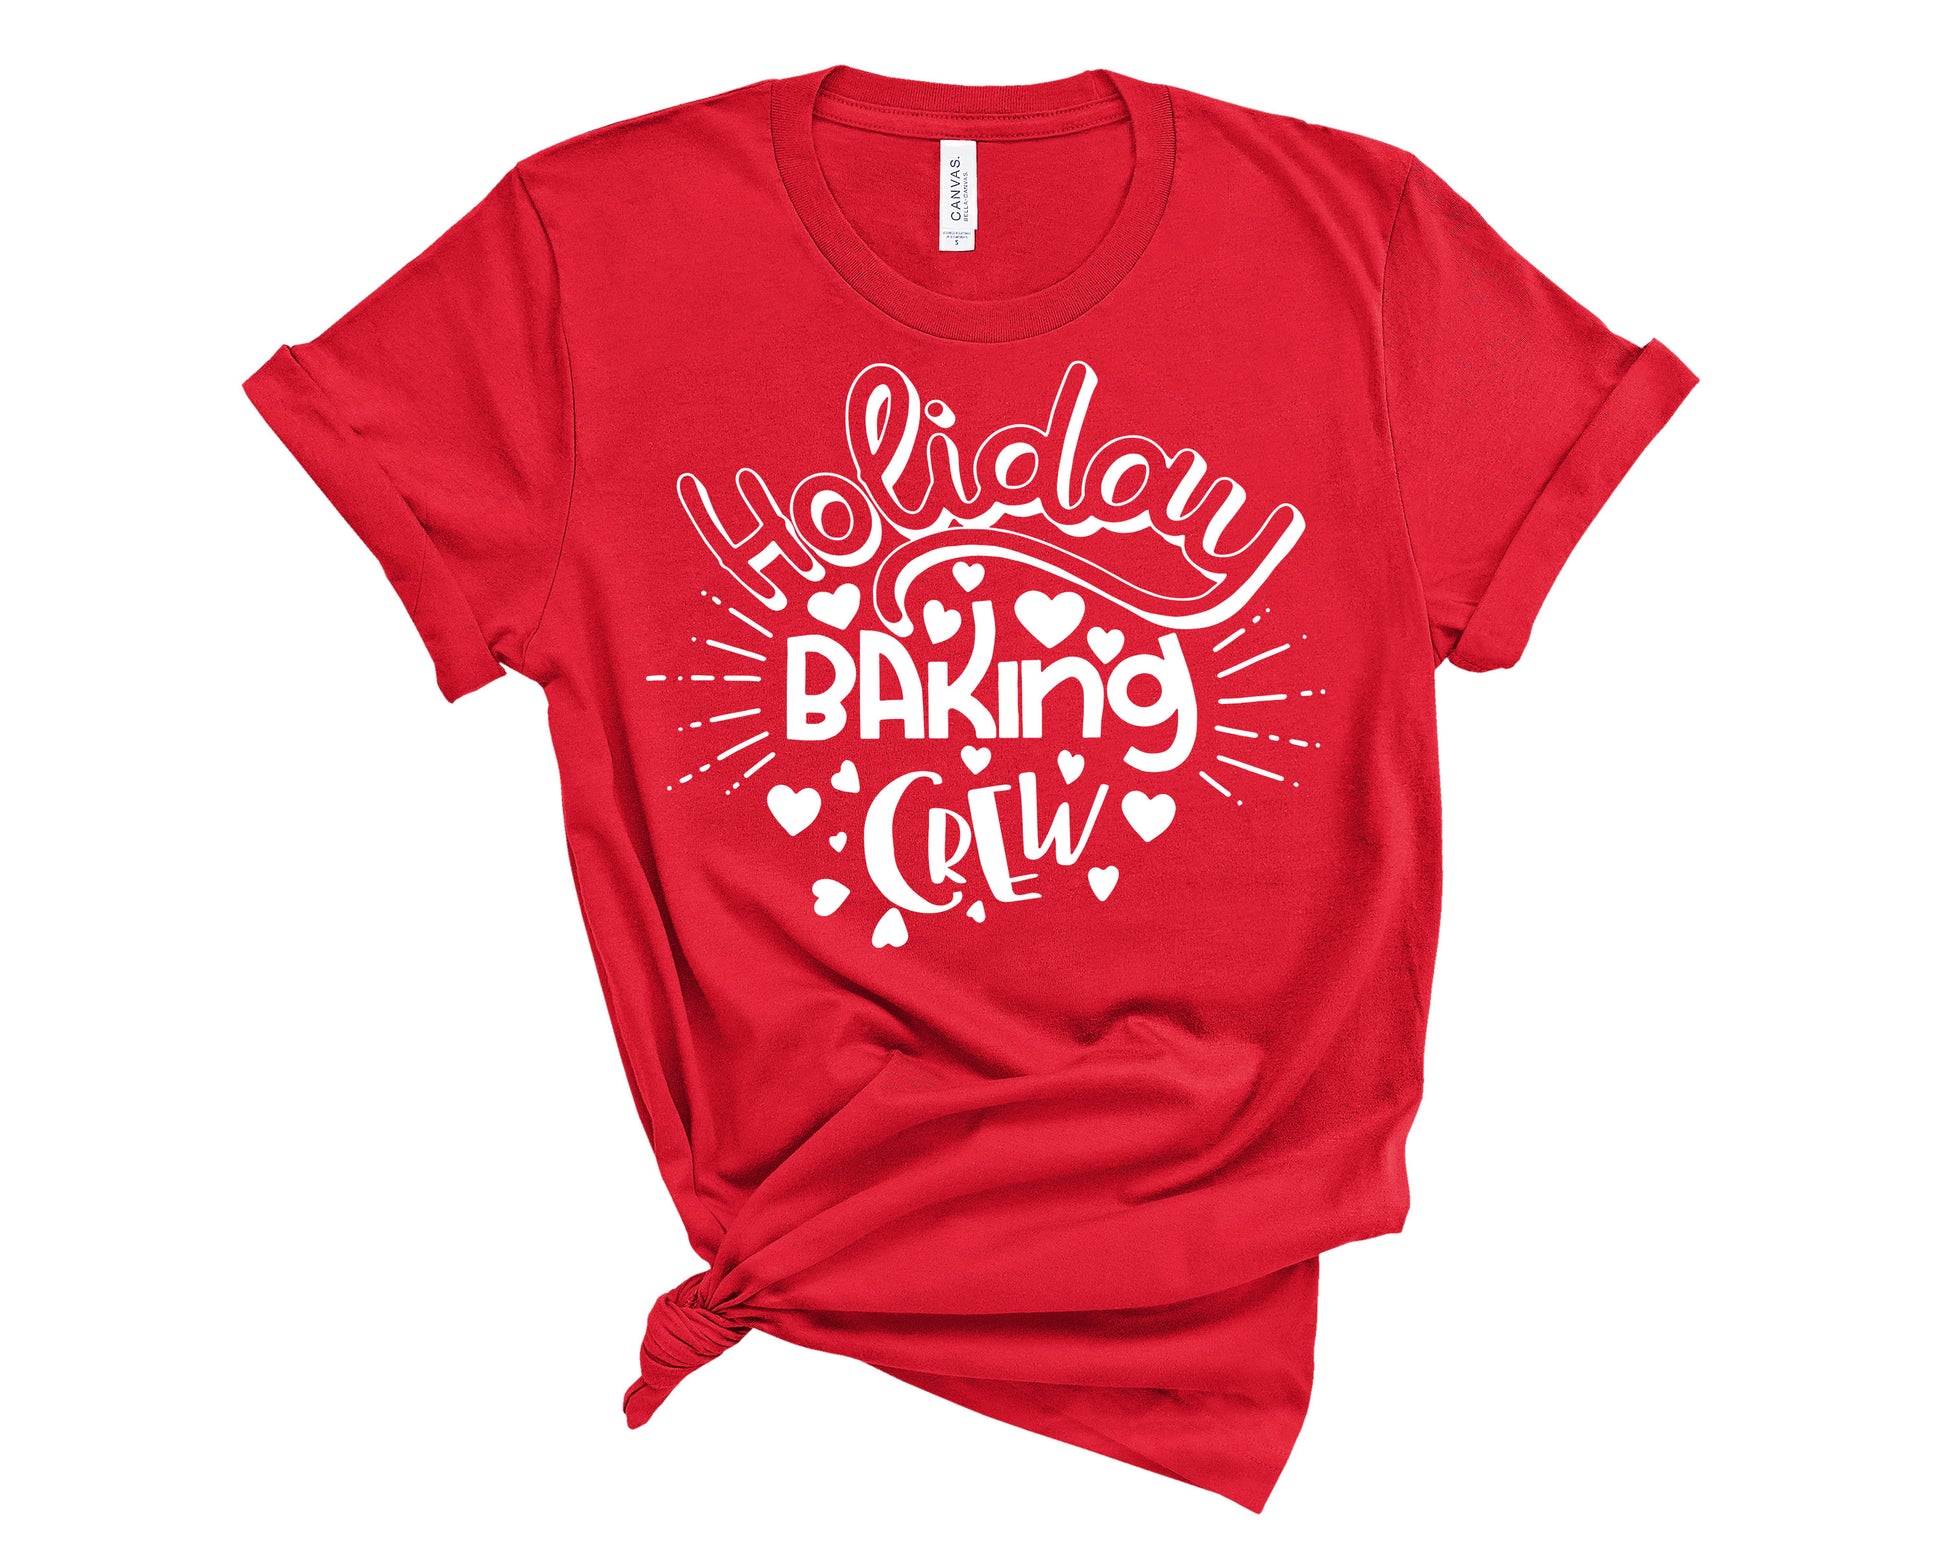 cooking baking party shirts